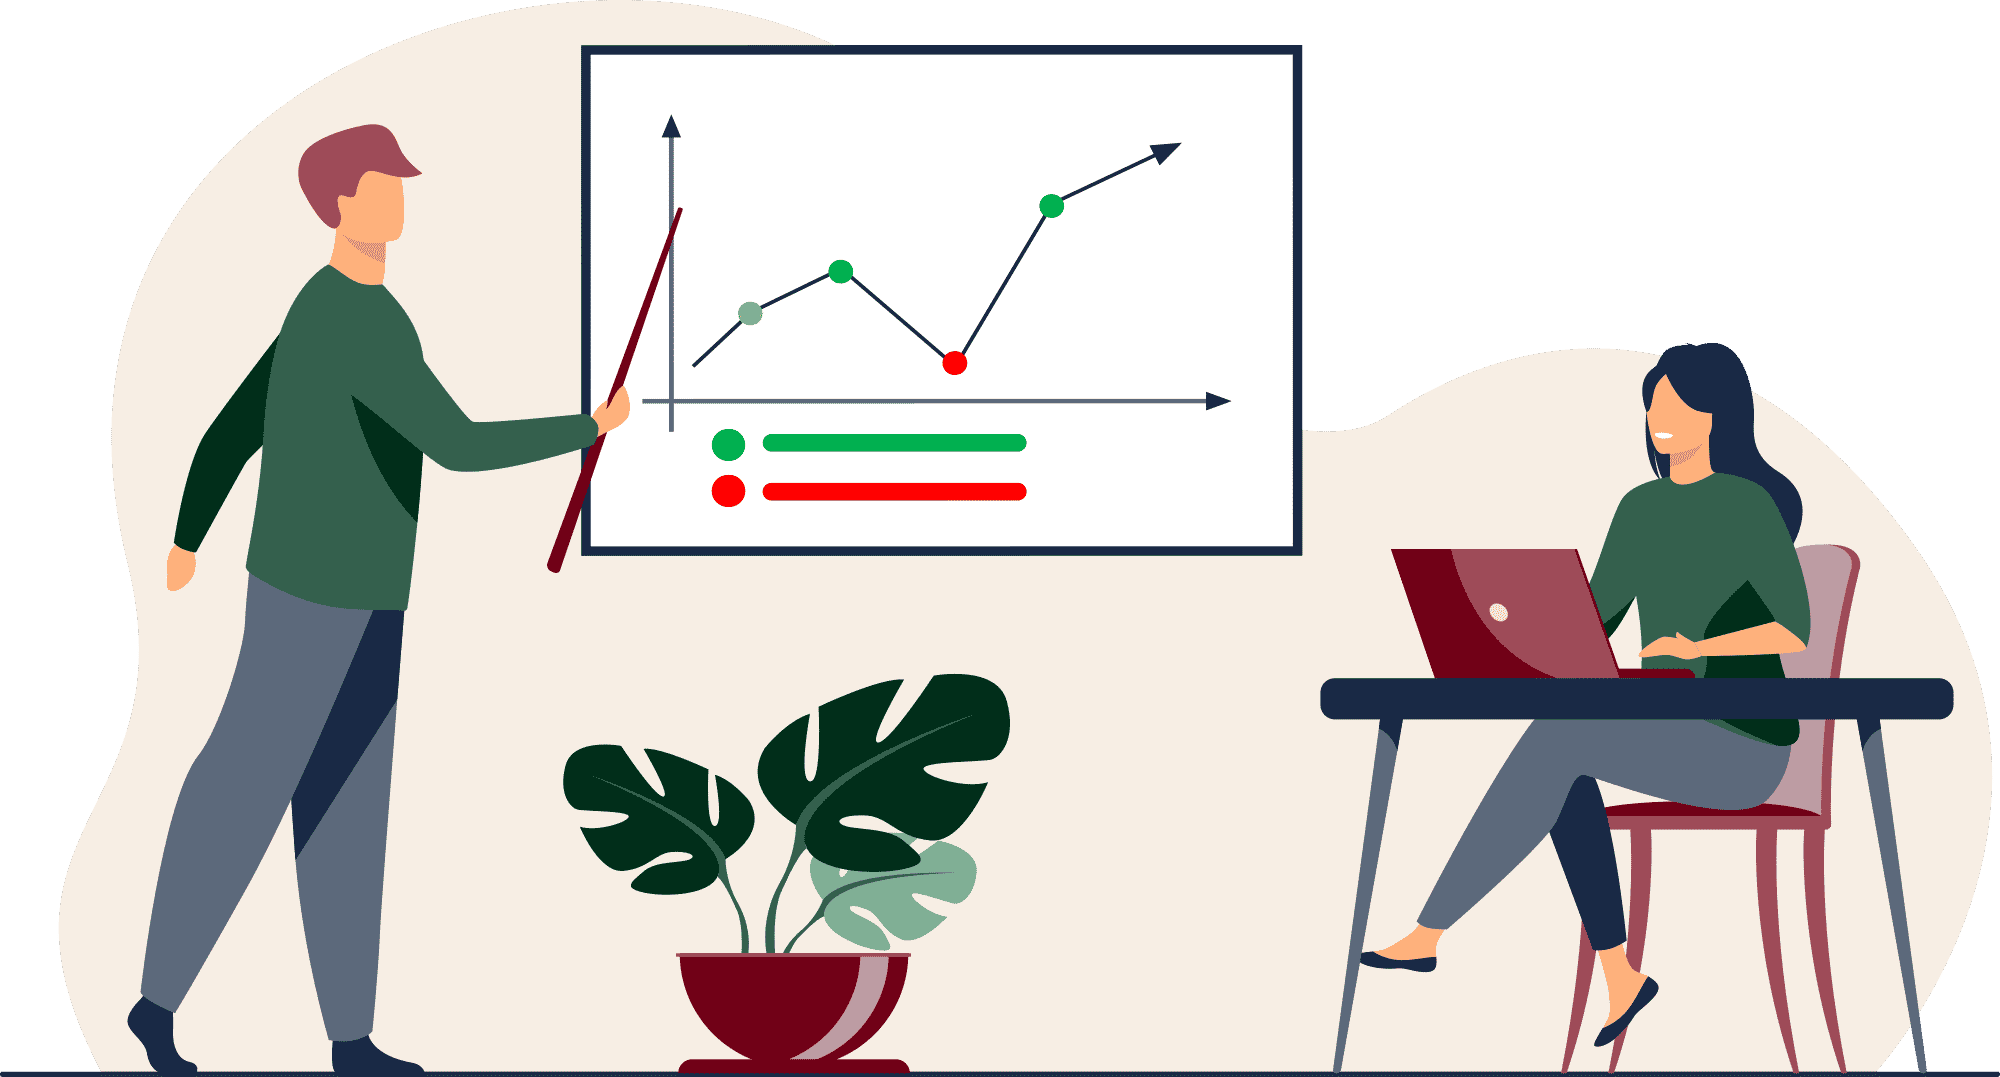 Illustration of a man showing a growth graph on a presentation slide.